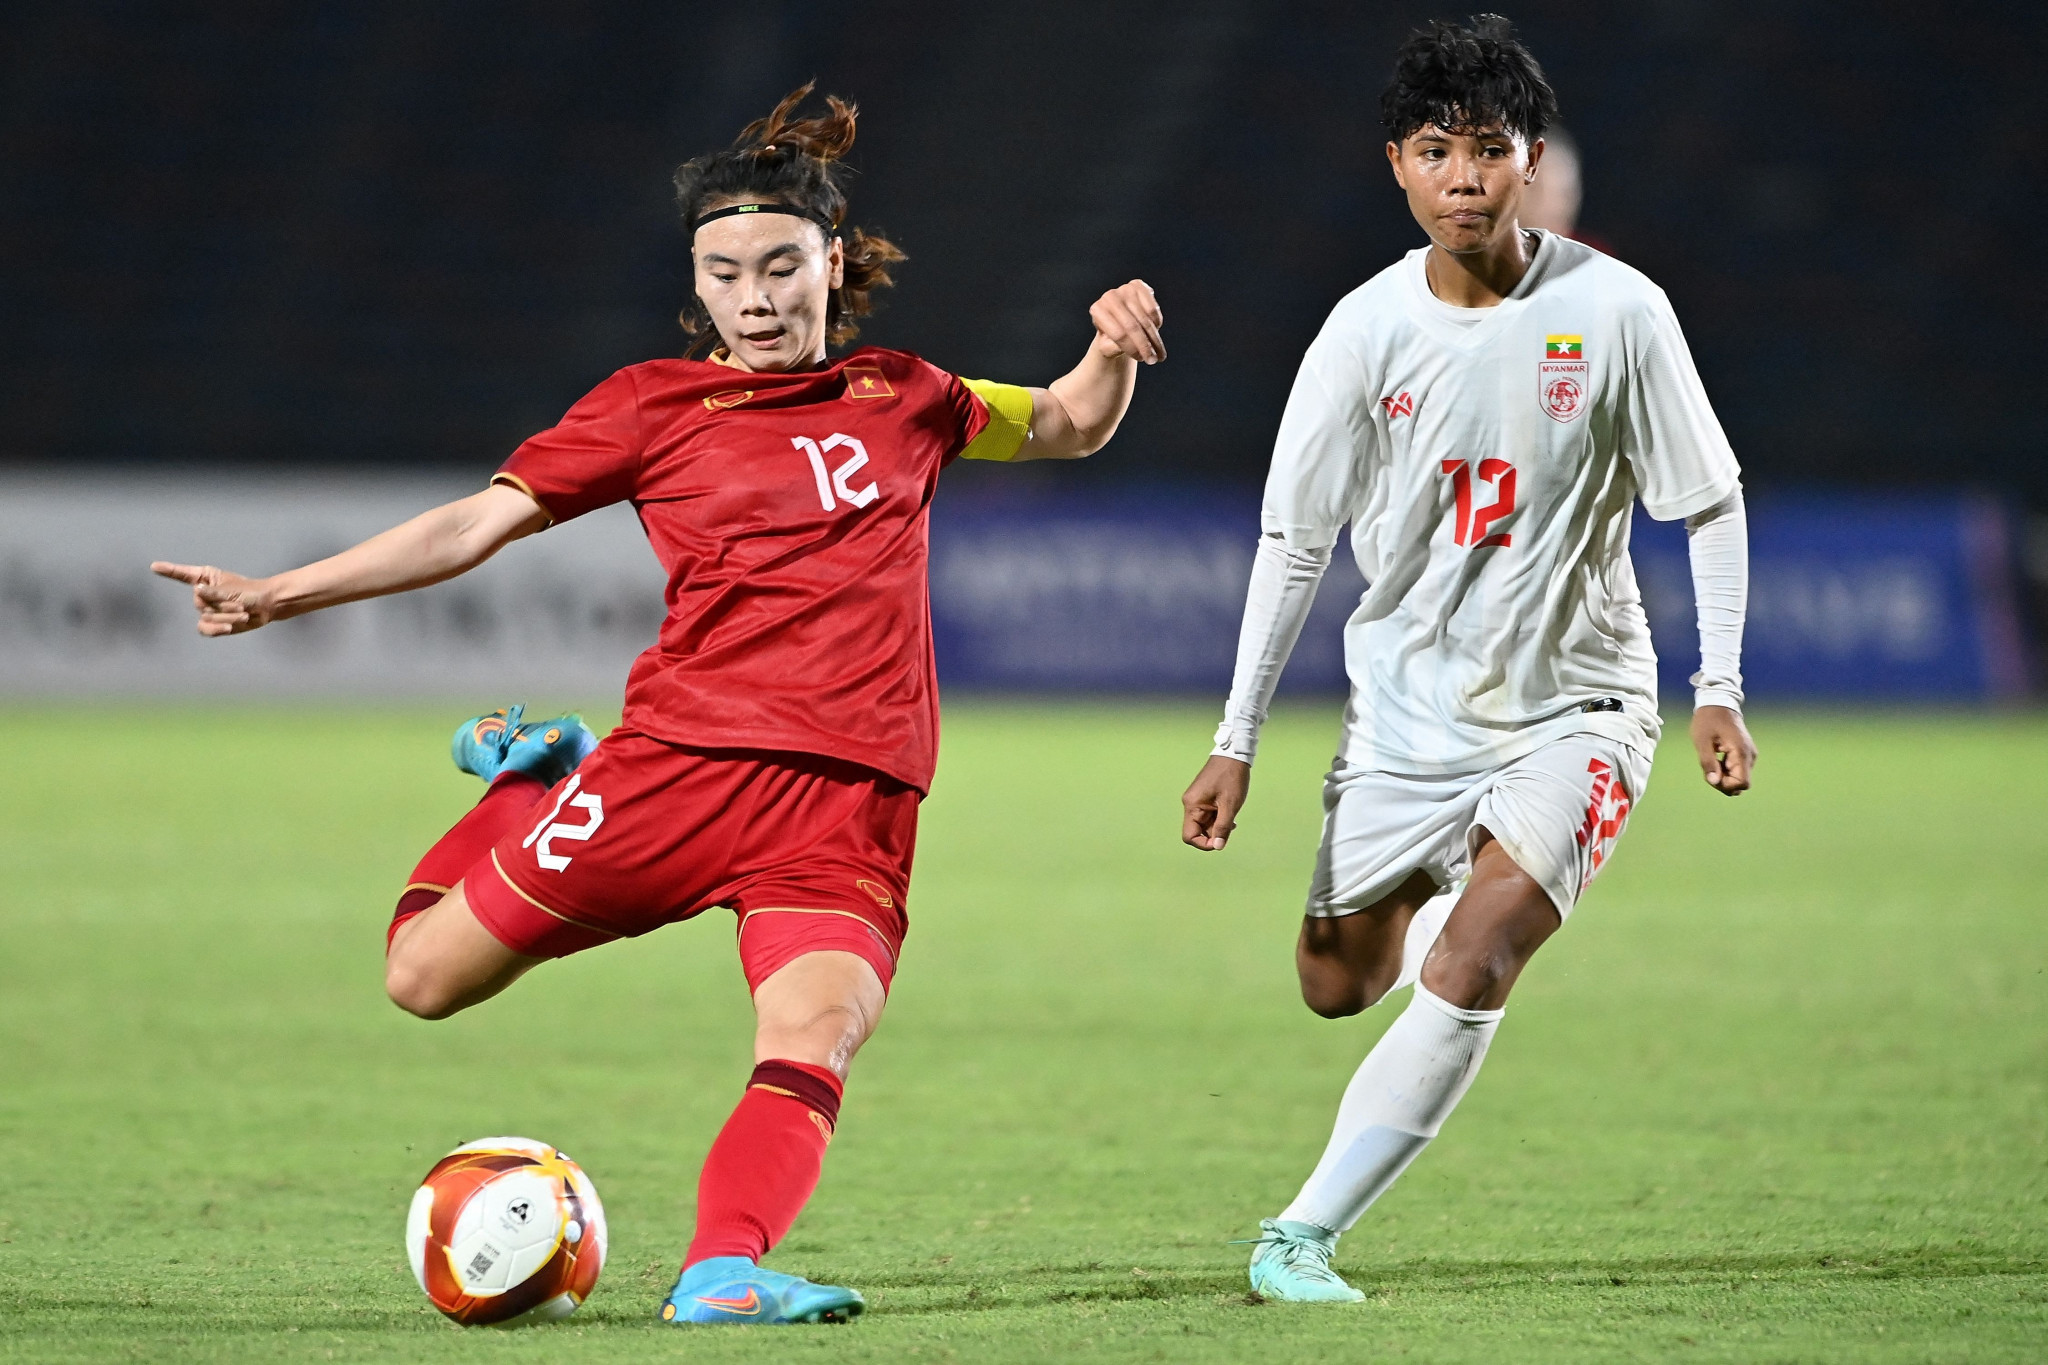 Vietnam won women's football gold at the Southeast Asian Games ©Getty Images